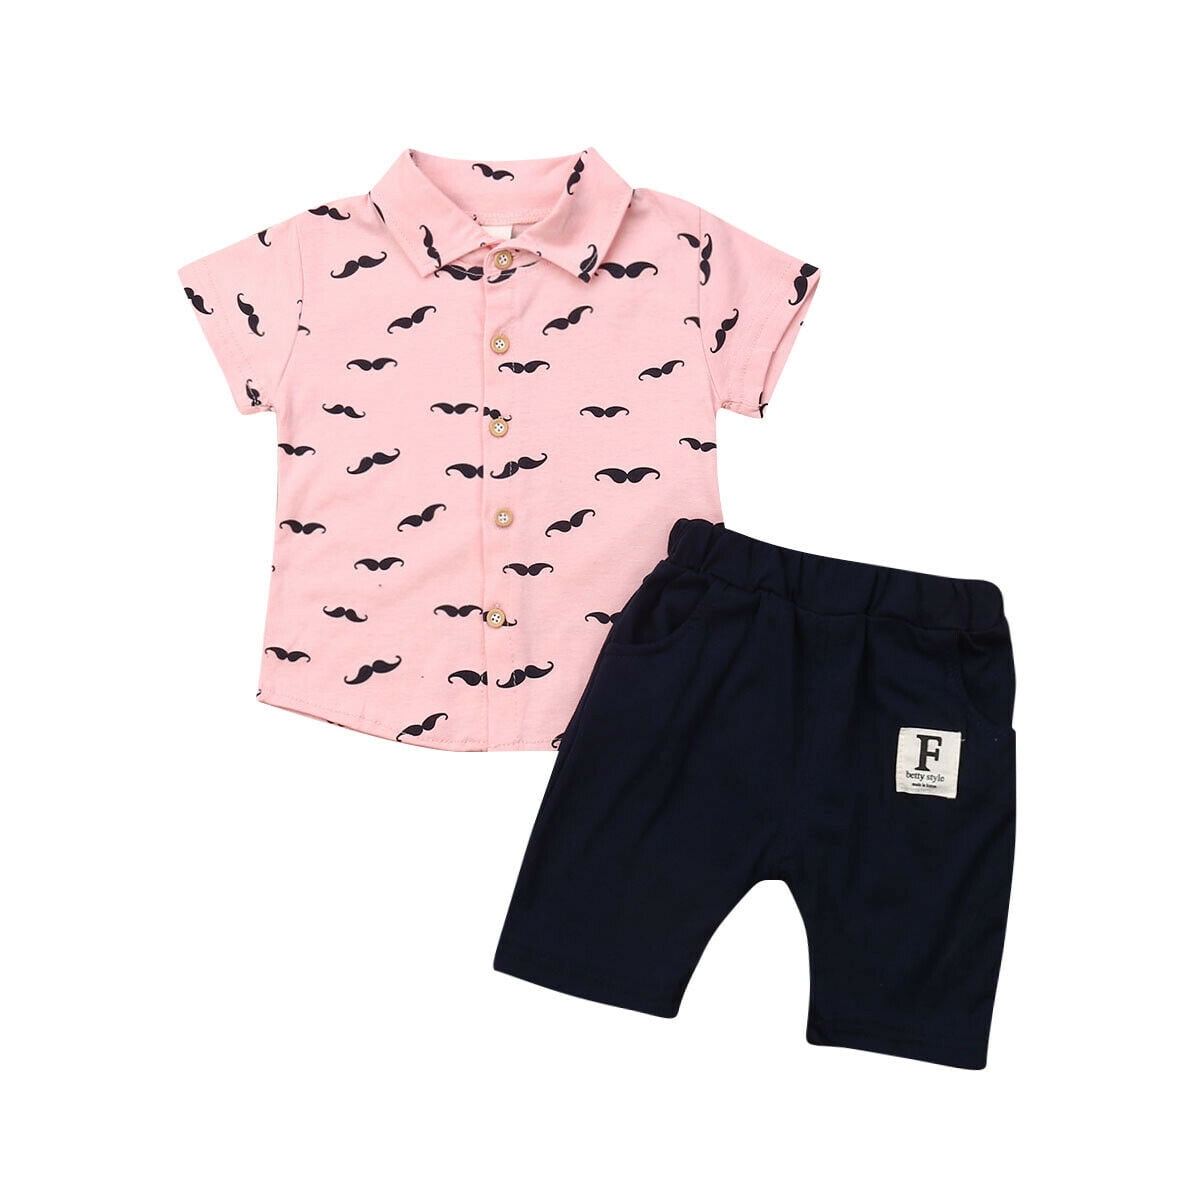 Toddler Infant Baby Boys Gentleman Polo T-Shirt Tops+Shorts Outfits Clothes Set 